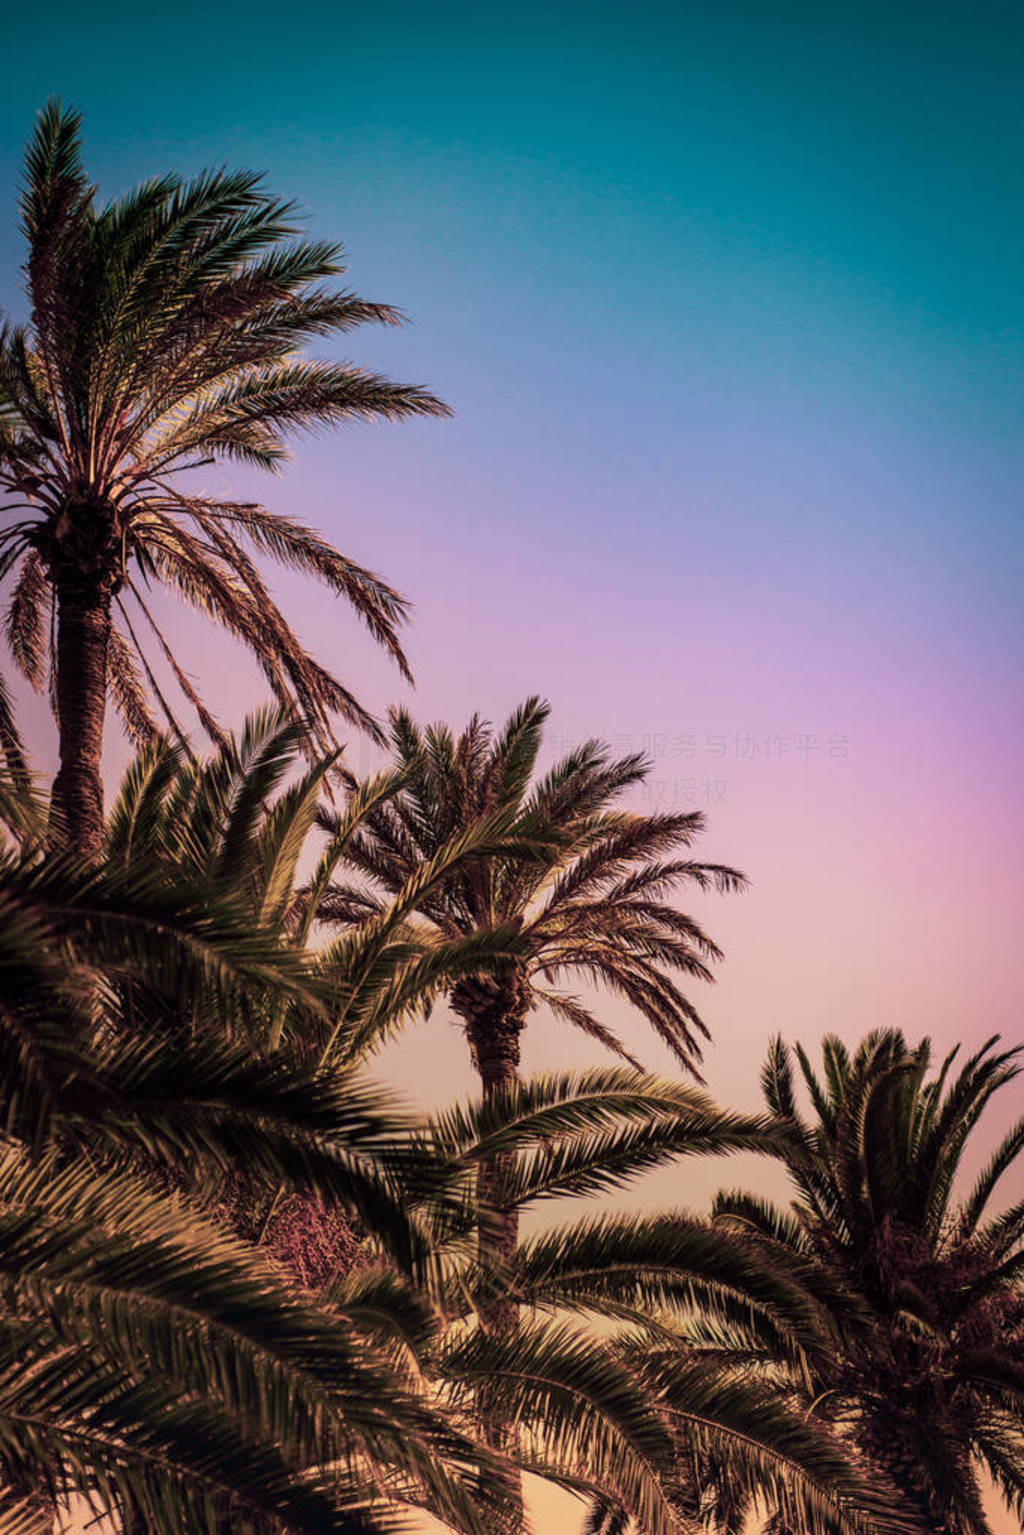 Row of Tall Palm Trees at Sunset